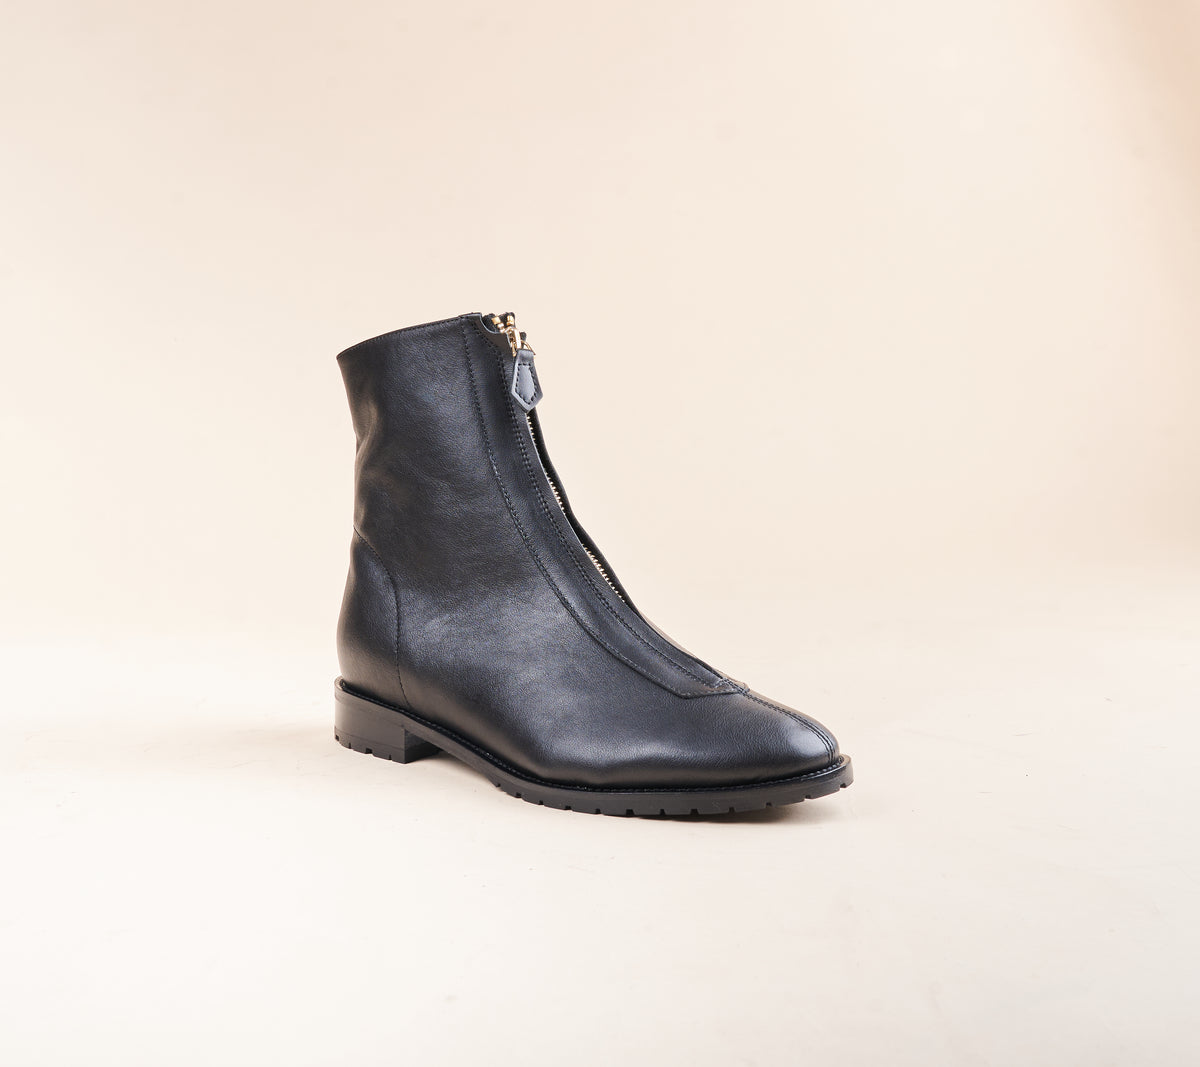 Roma Due Rugged - Black Leather